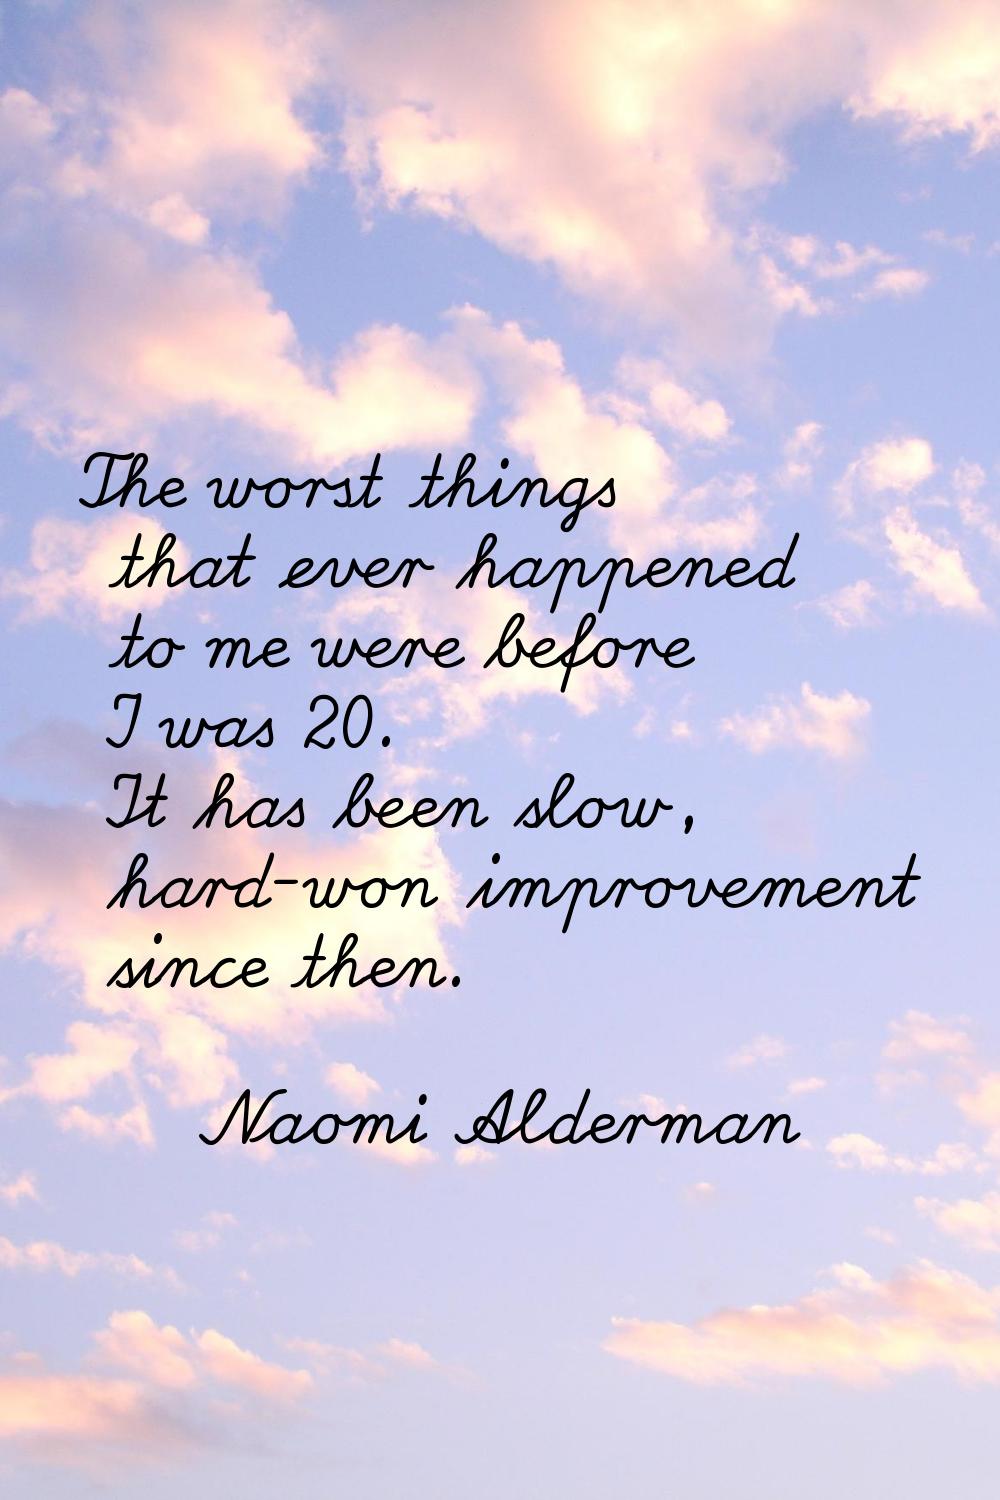 The worst things that ever happened to me were before I was 20. It has been slow, hard-won improvem